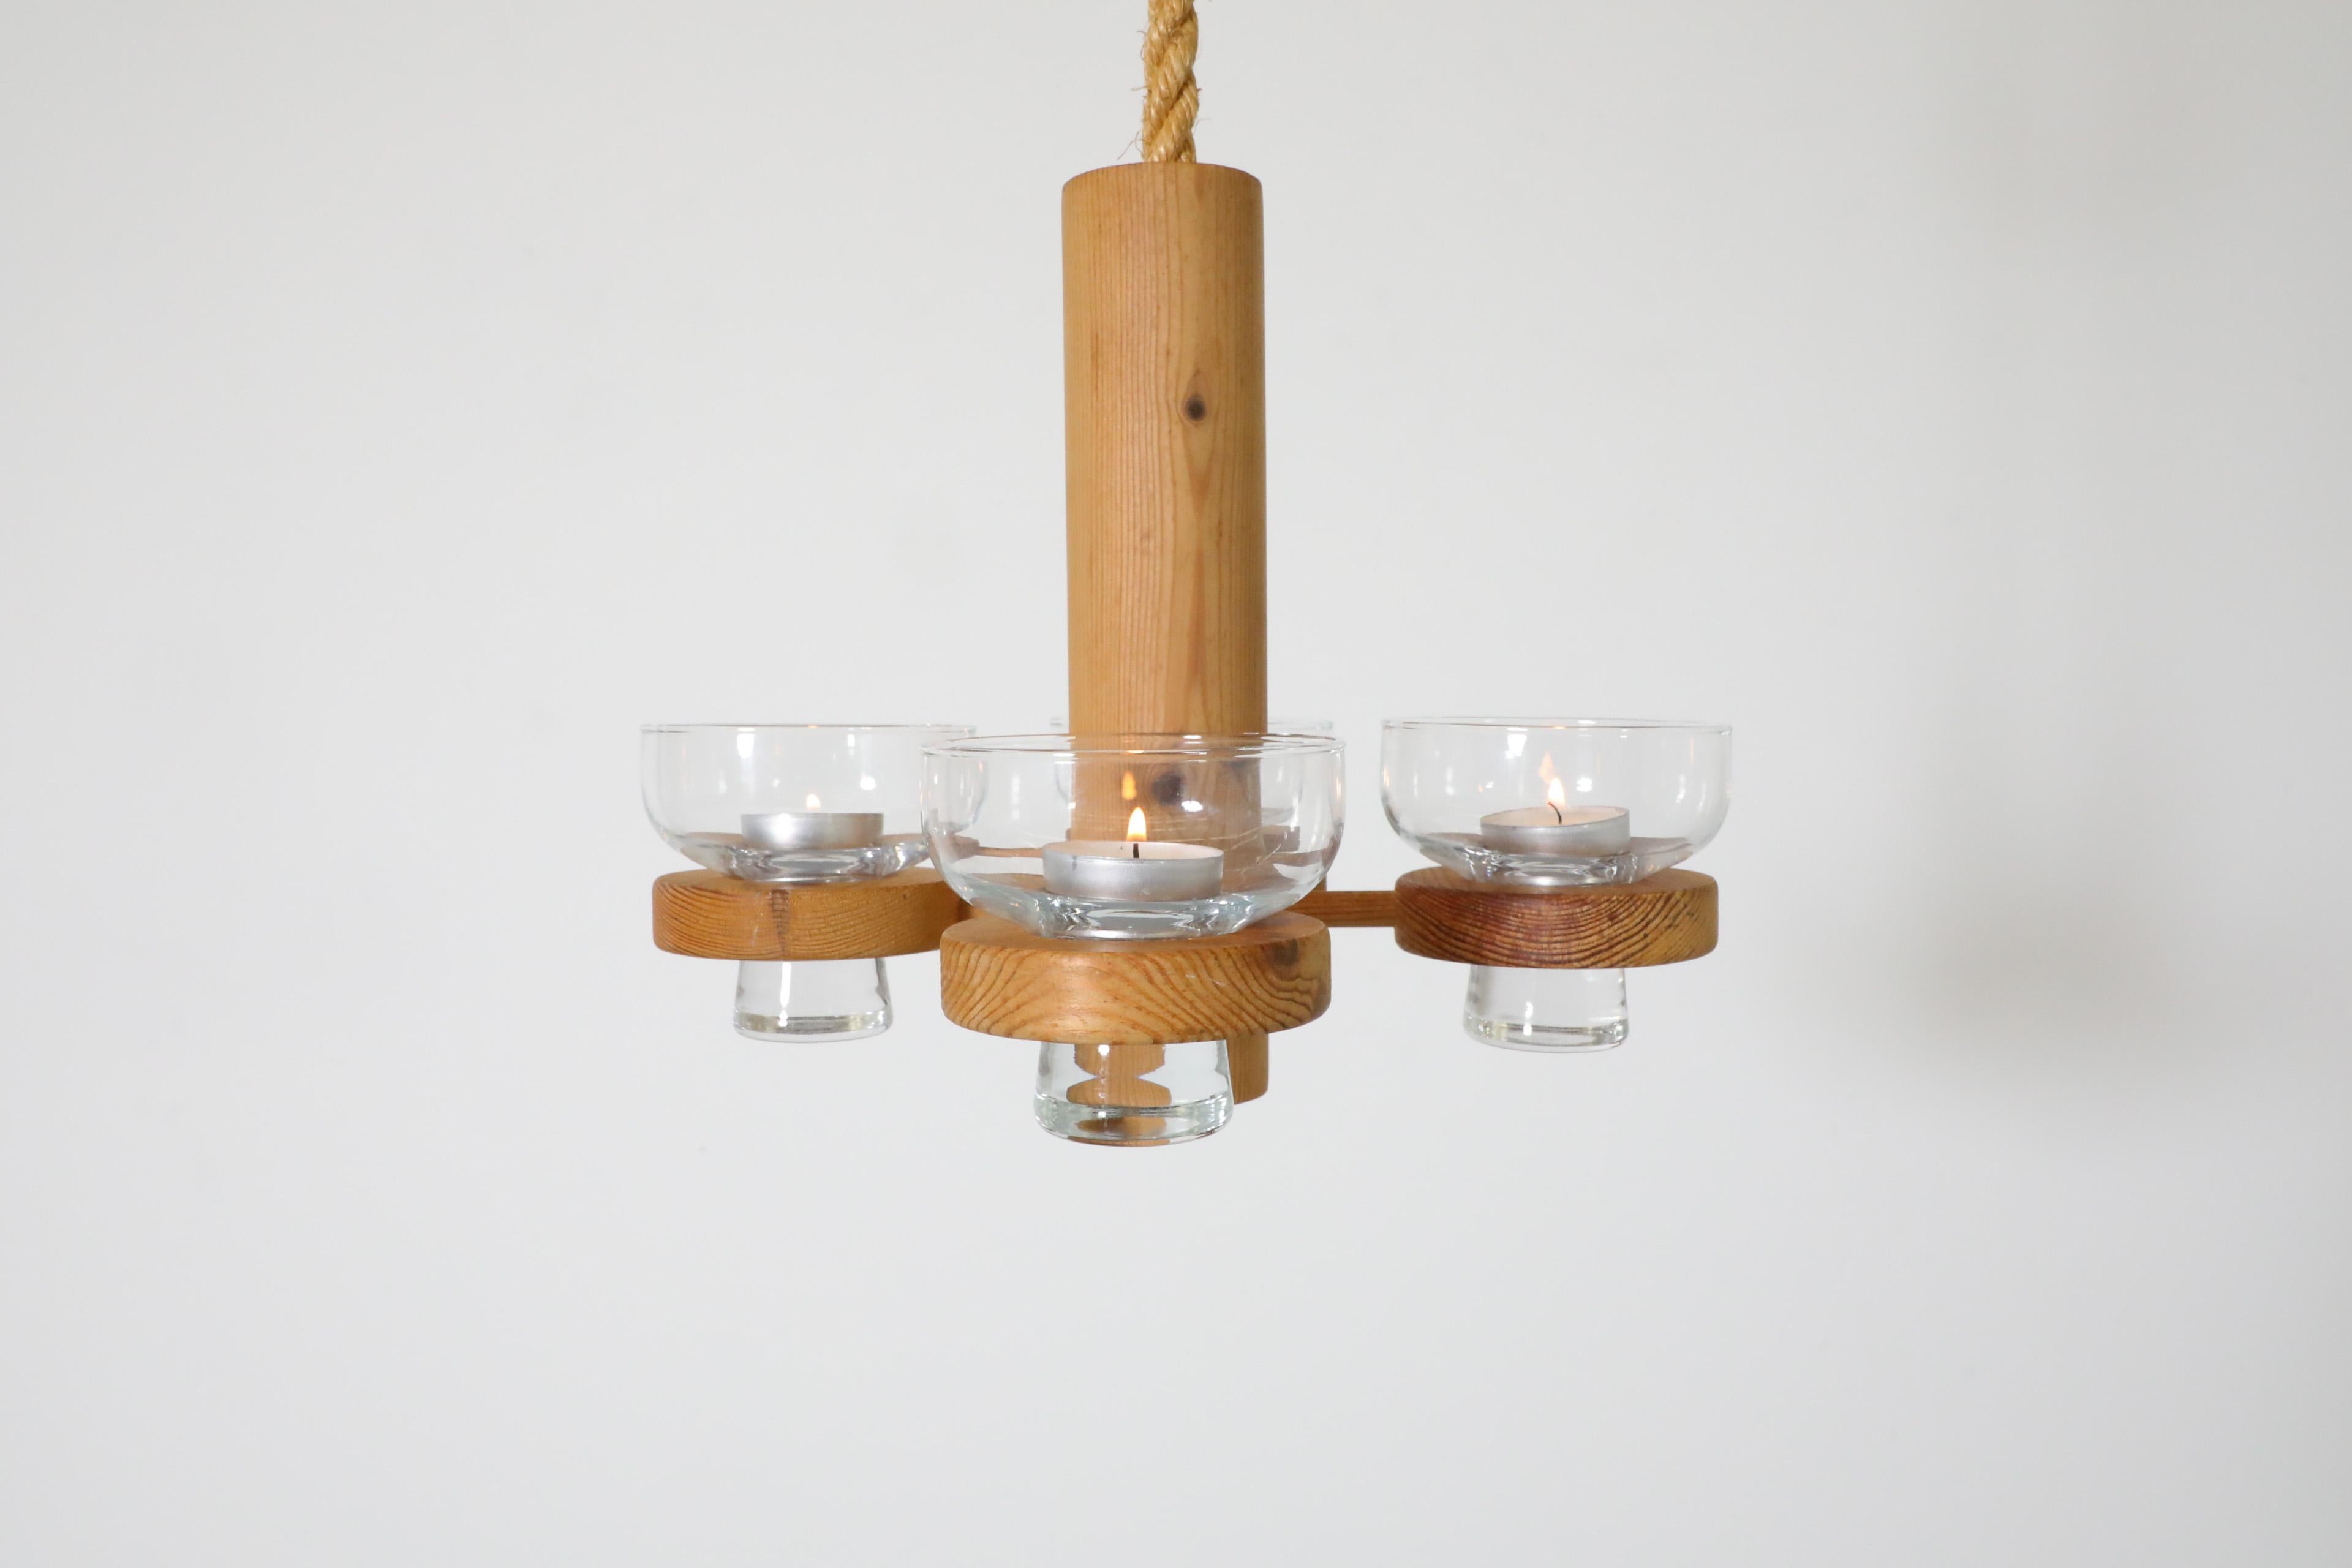 Hanging Pine Chandelier Candlestick Holder with 4 Glass Candle Holders In Good Condition For Sale In Los Angeles, CA